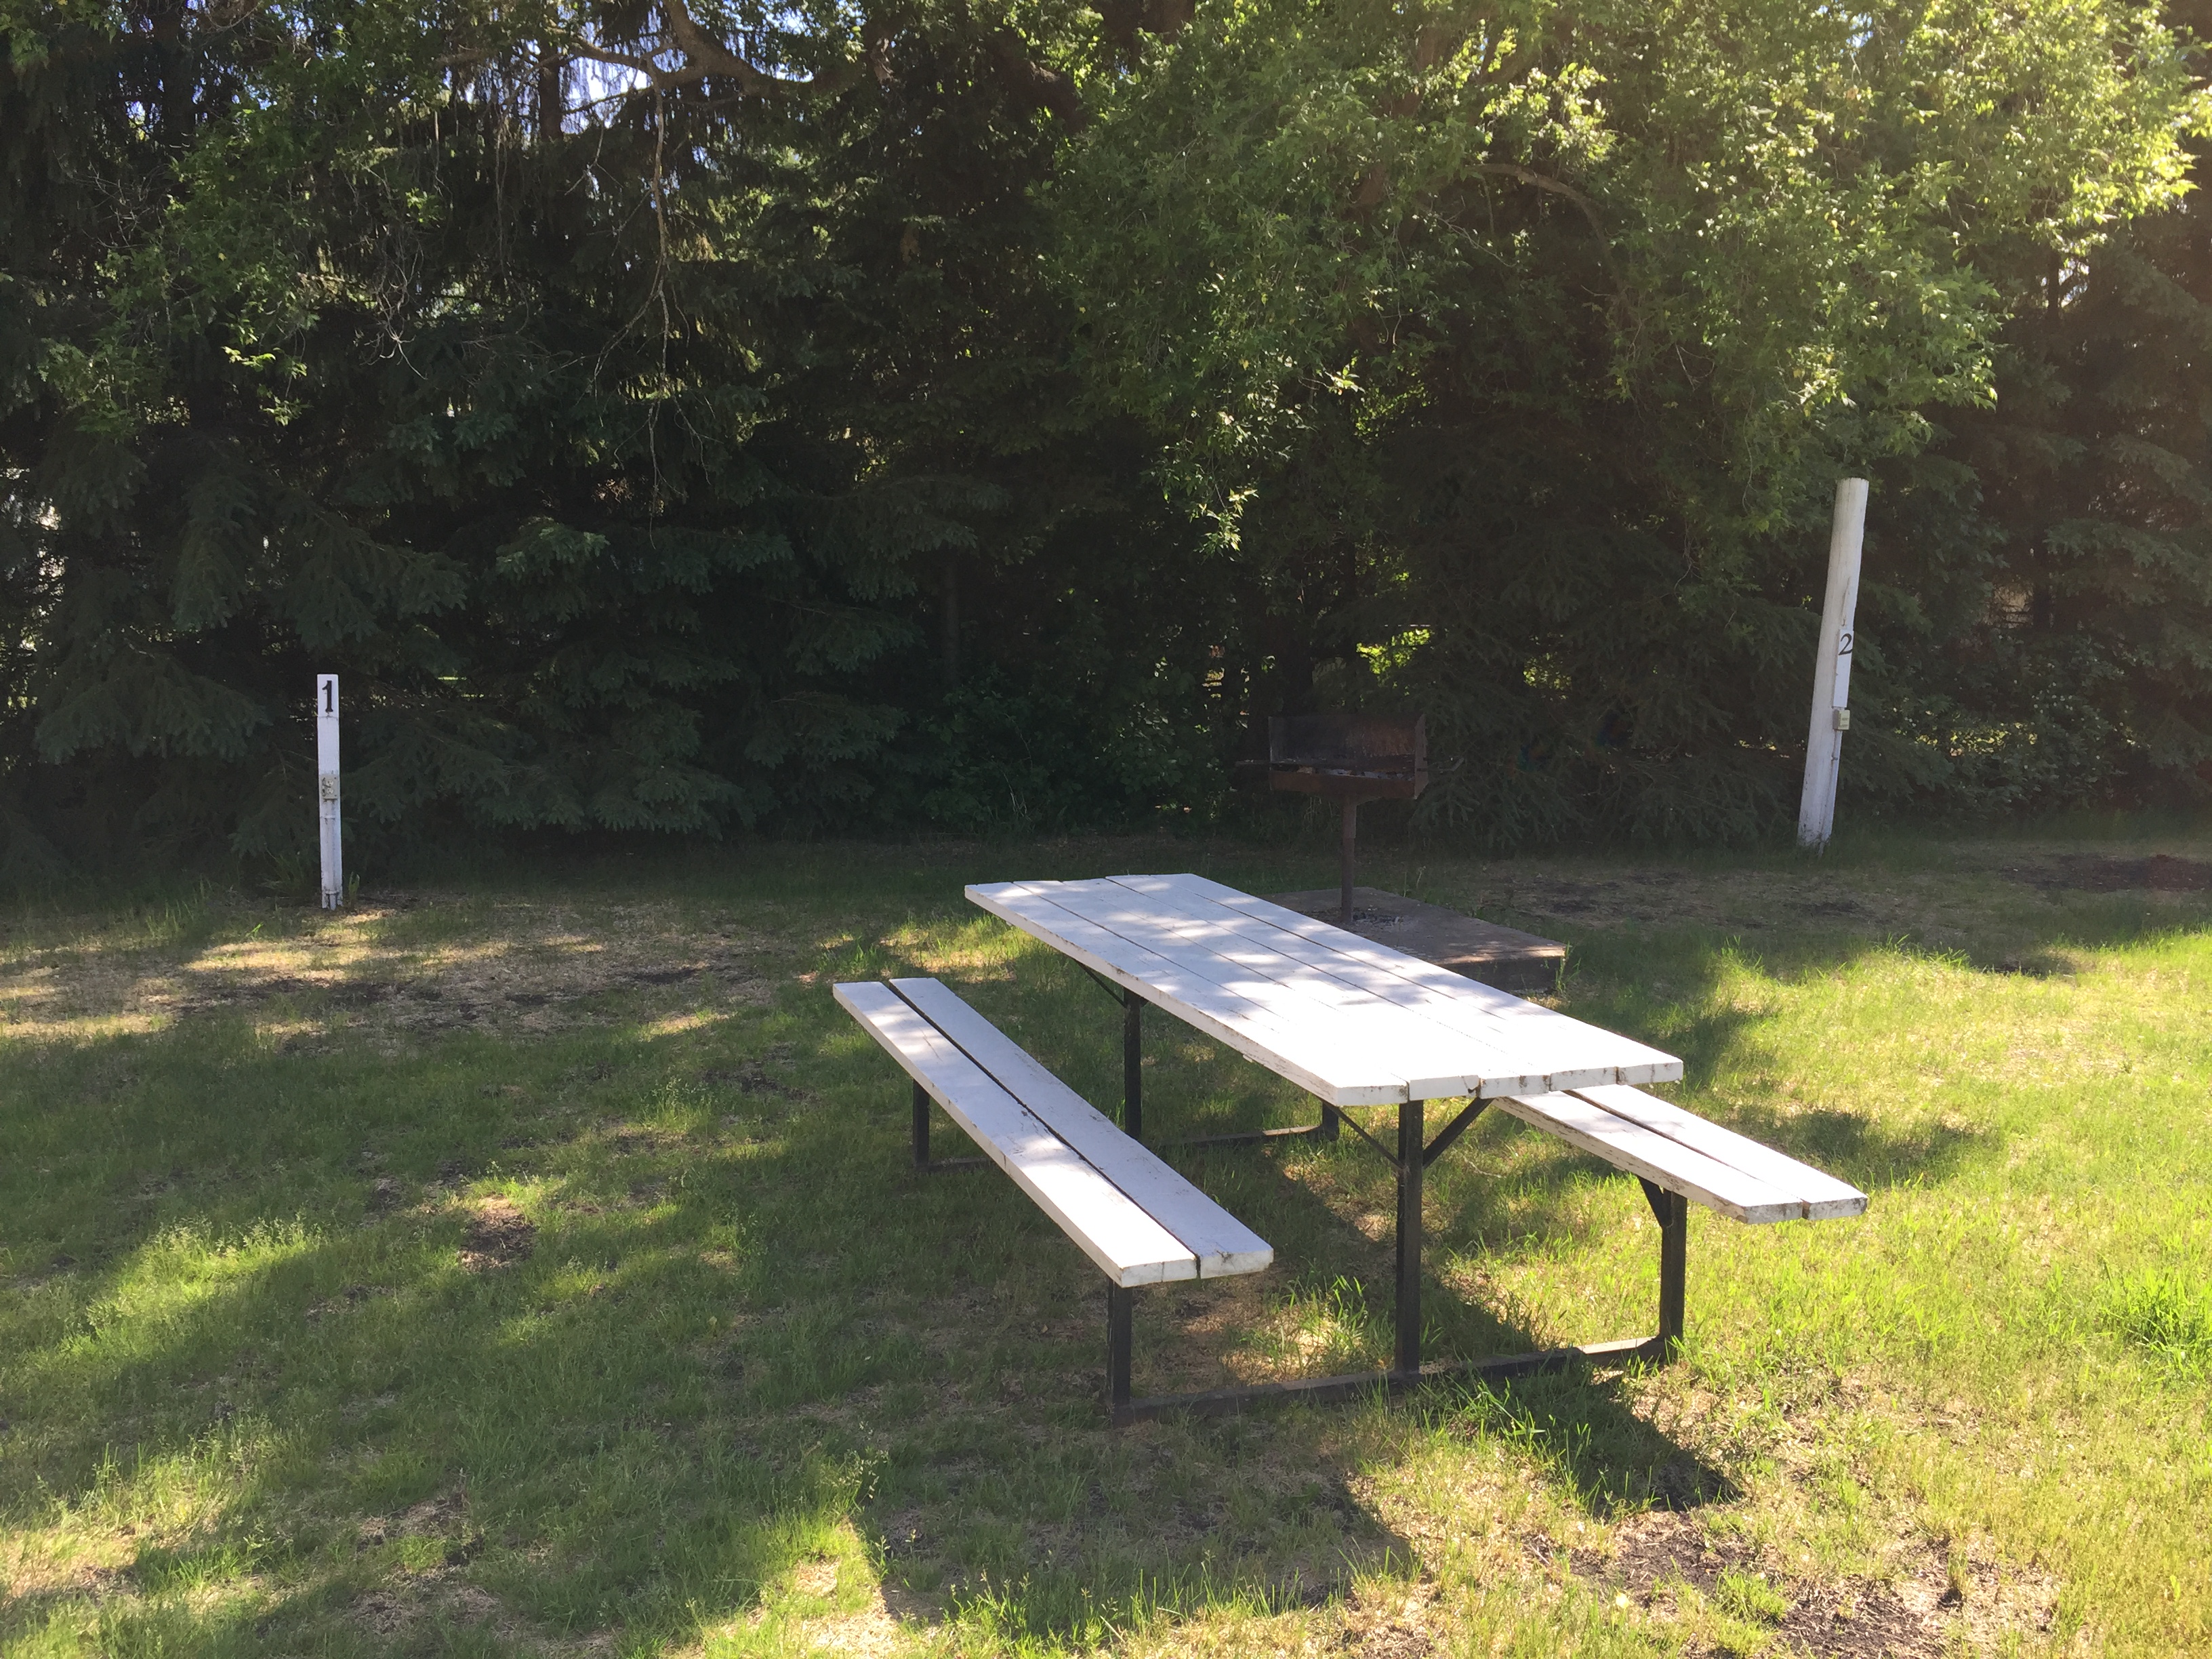 Each camping site has their own picnic table